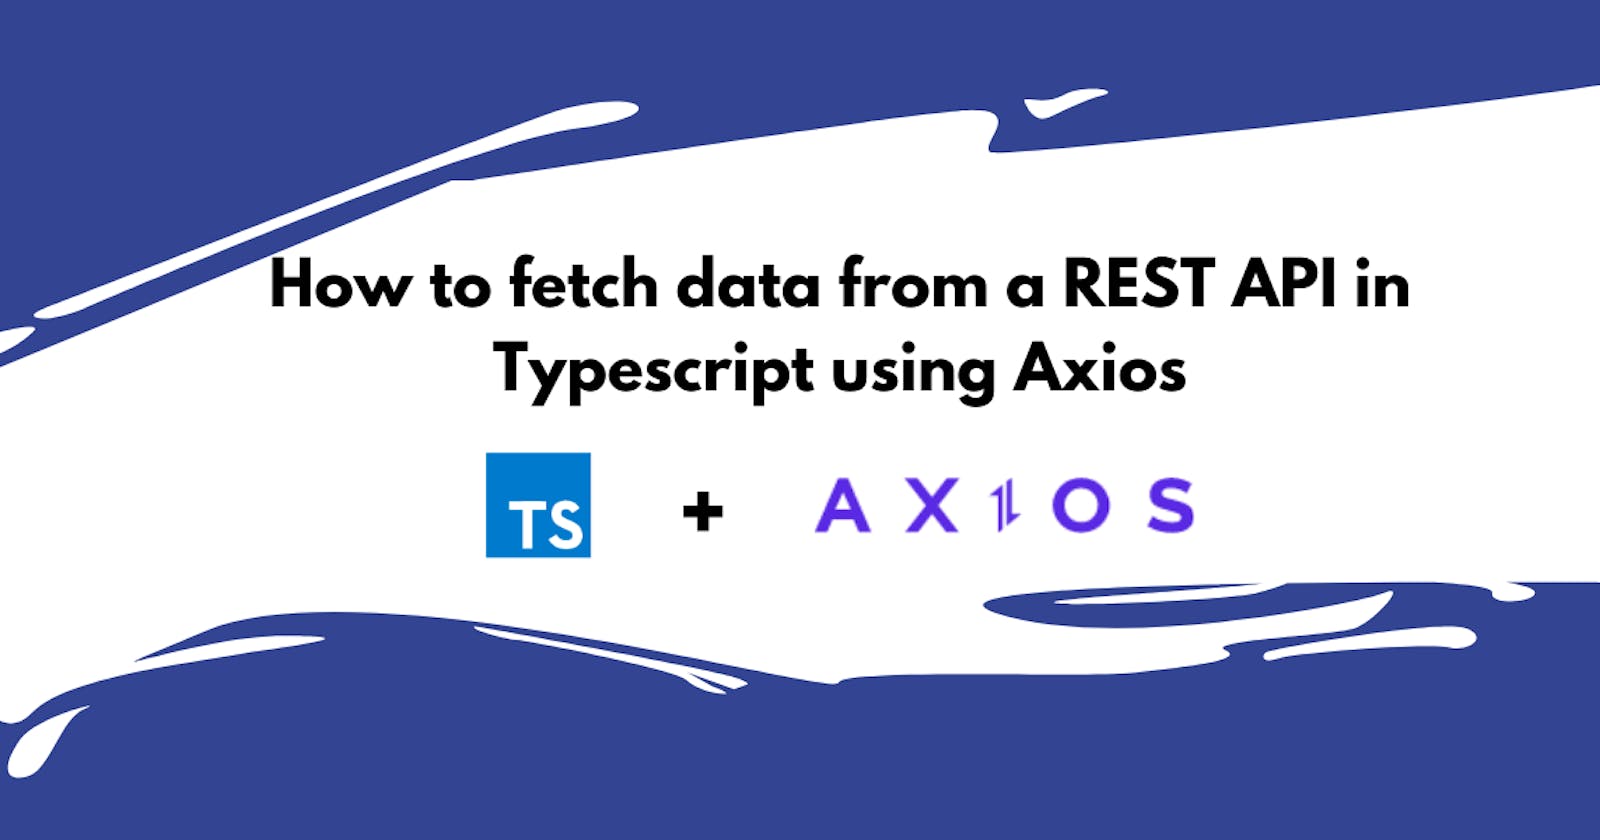 How to fetch data from a REST API in Typescript using Axios